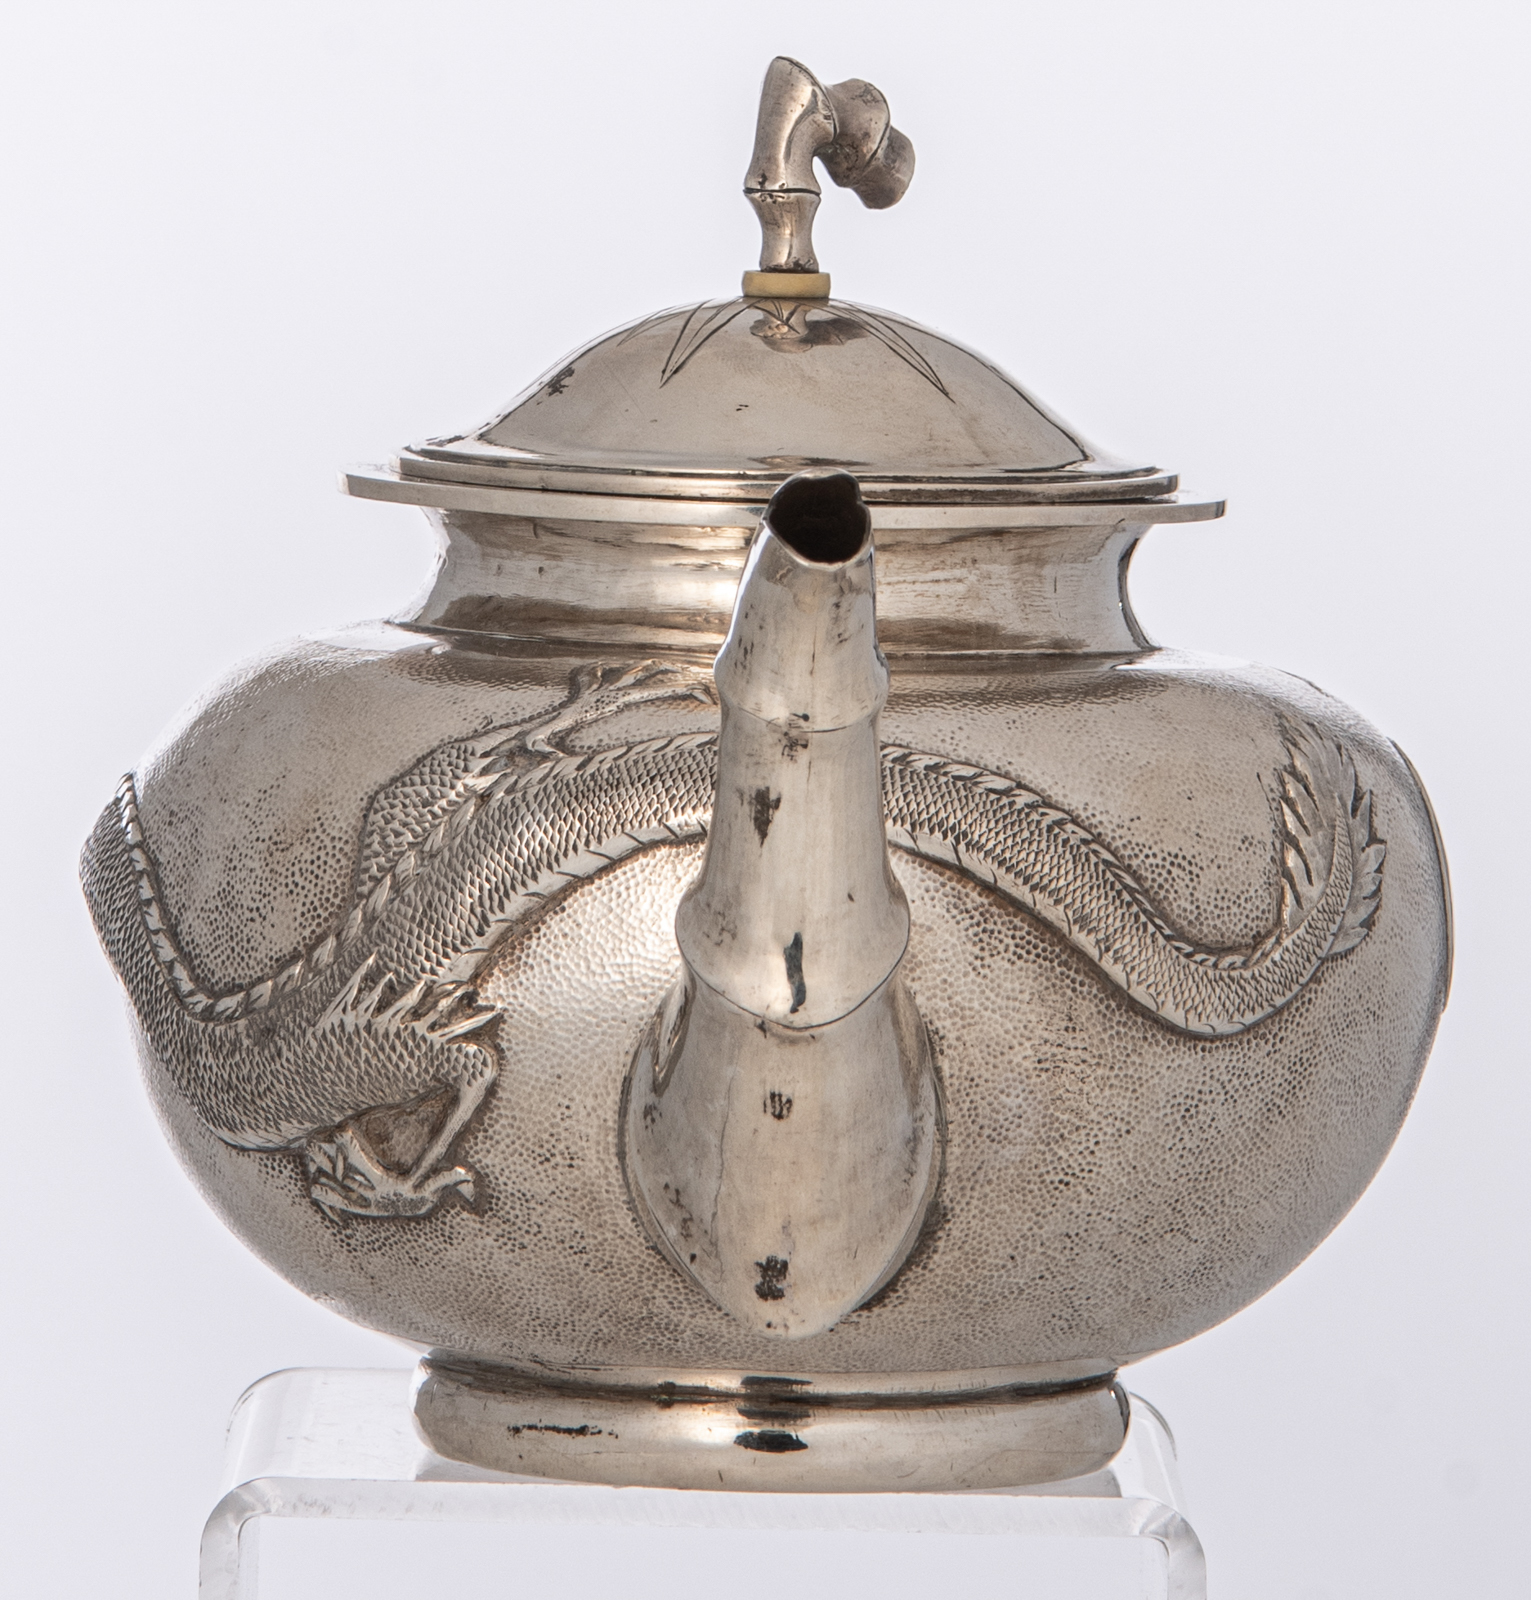 A Chinese three-piece silver tea set with dragon design, marked 'Yok Sang', Shanghai, H 4,5 - W 25,5 - Image 5 of 19